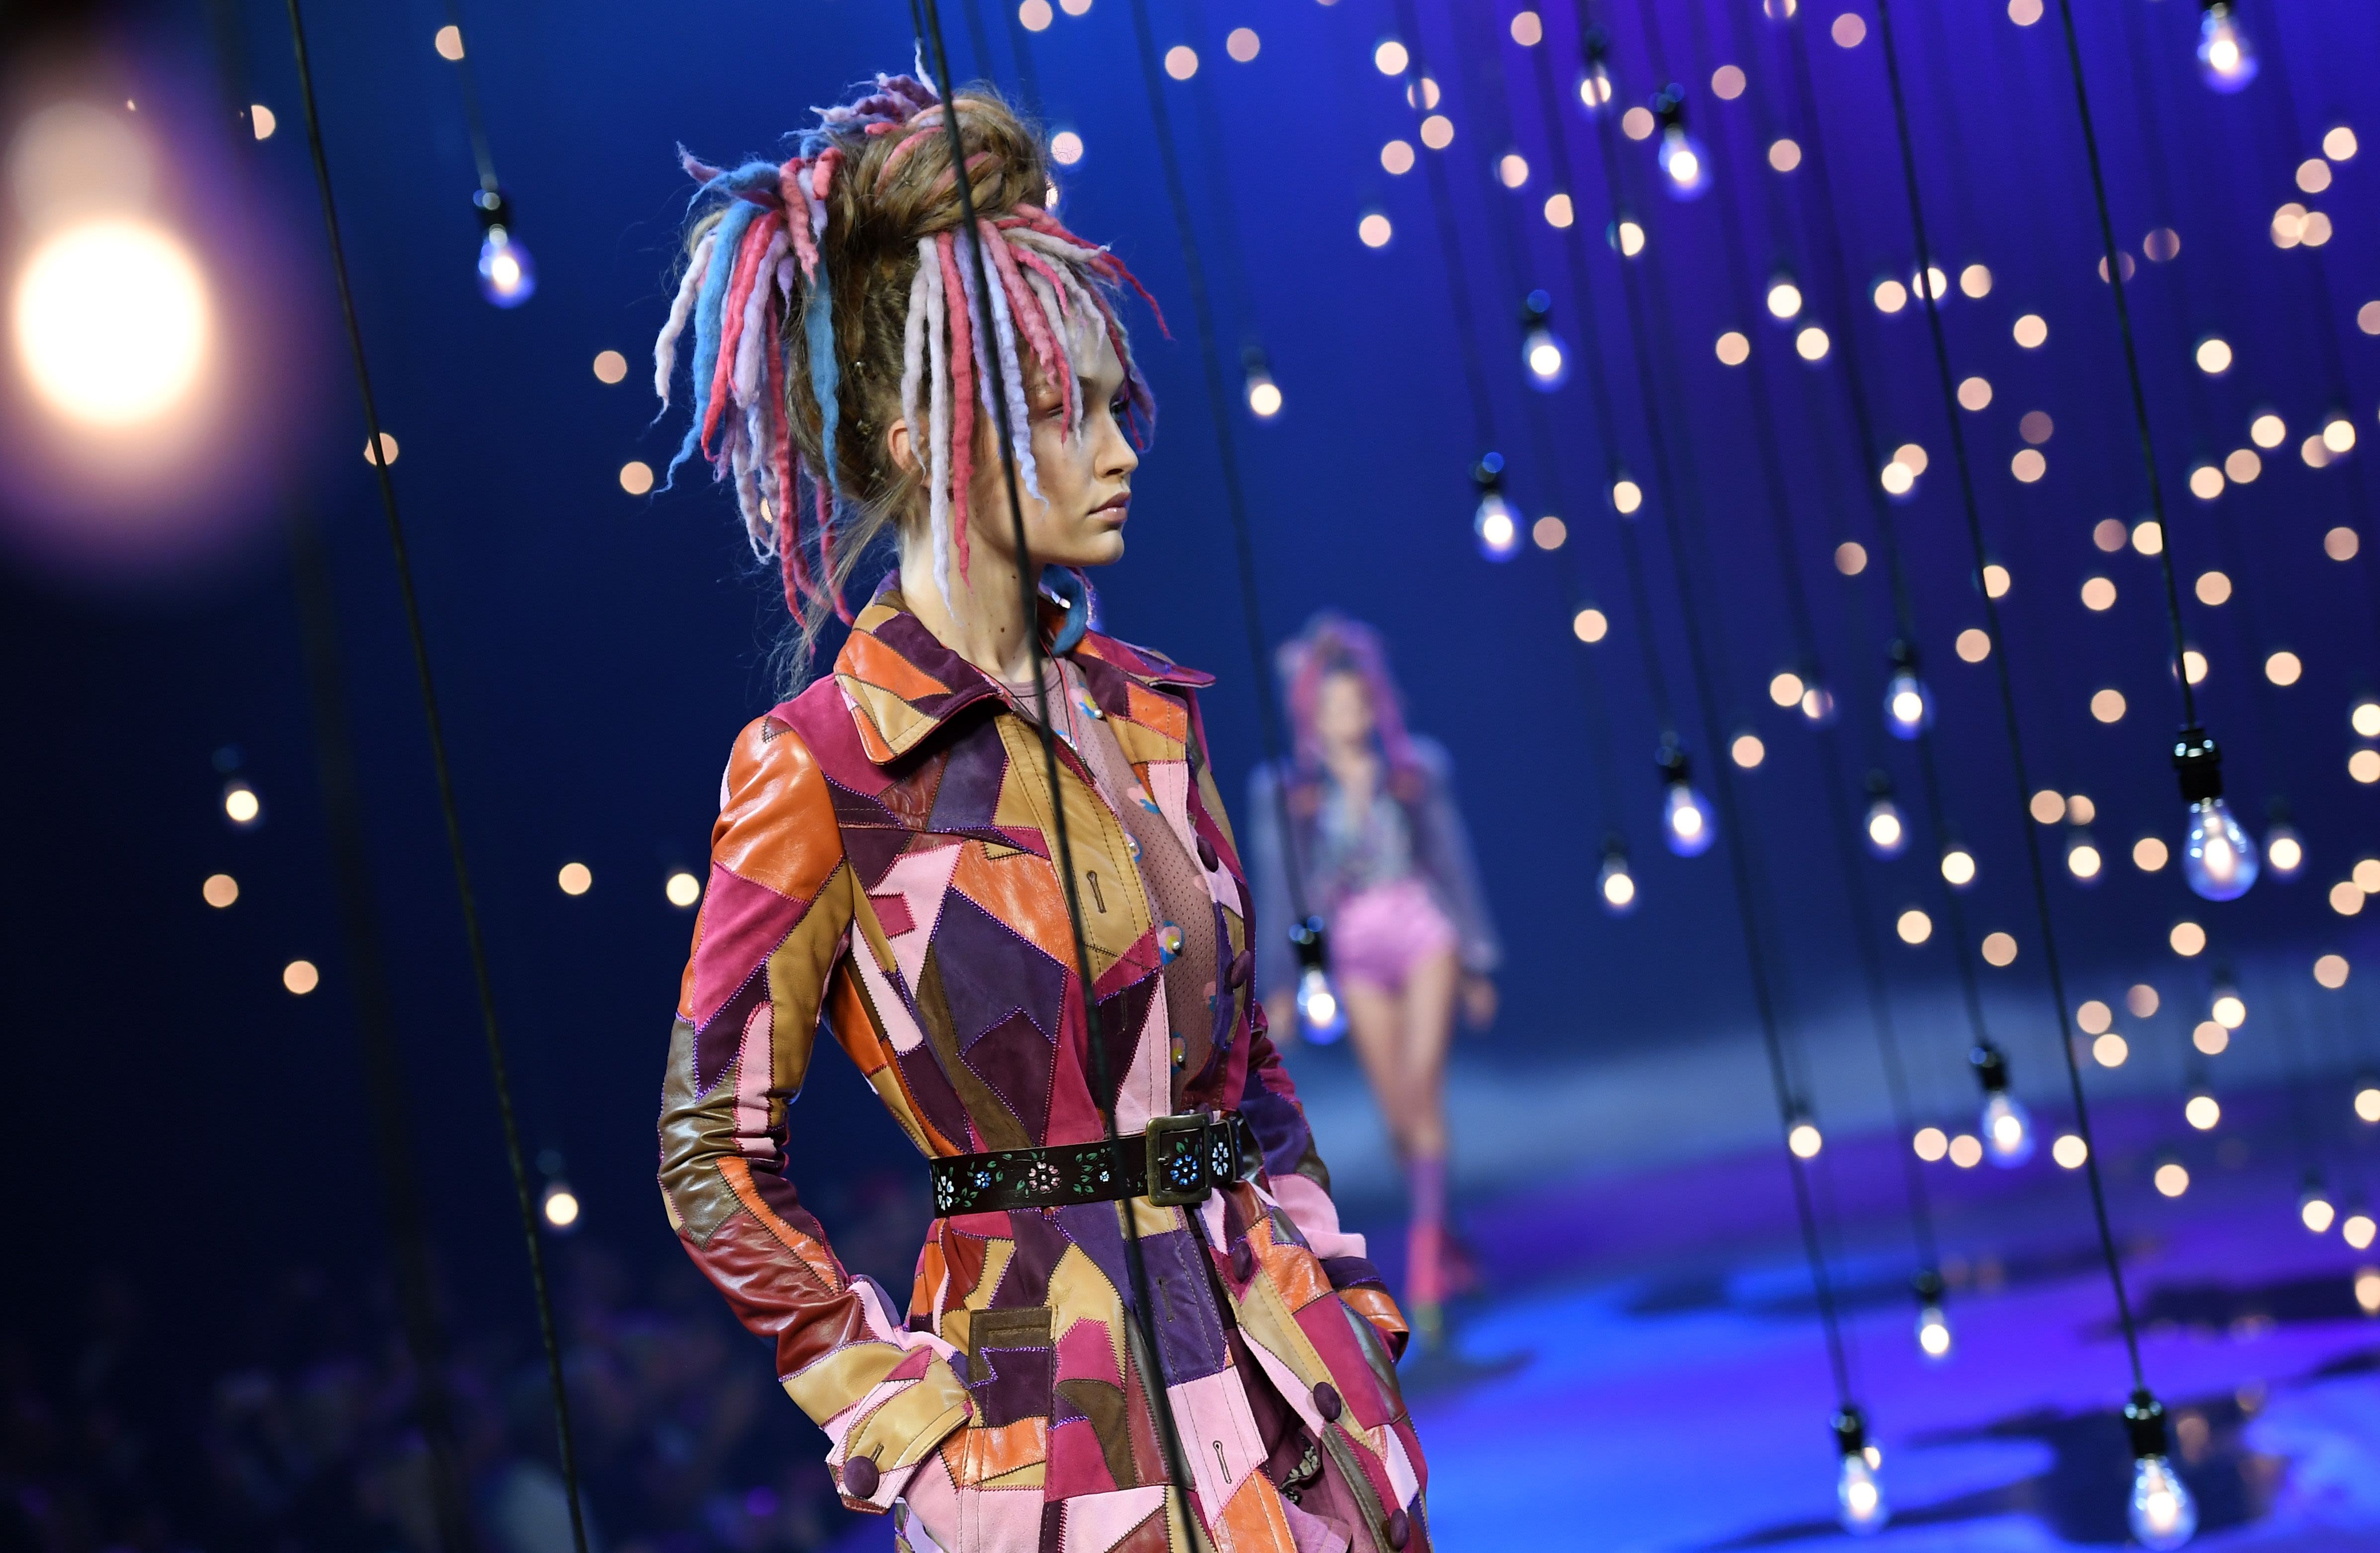 Marc Jacobs Apologizes for Dreadlocks Comments on Instagram